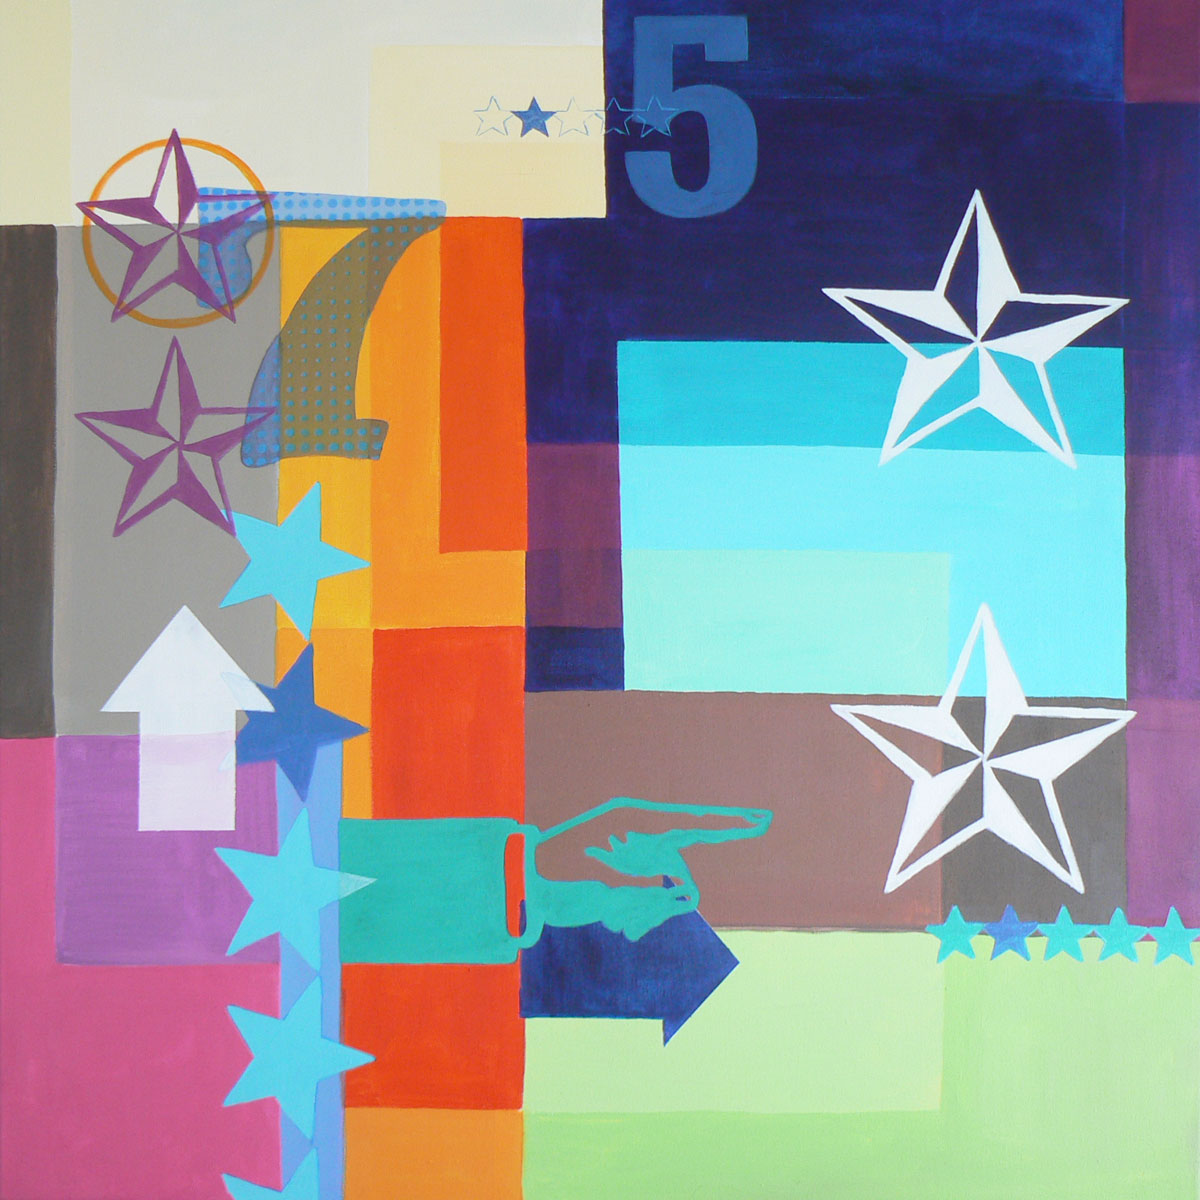 My lucky star (a pop art painting on the theme of good luck) (2018) Acrylic painting by Carolynne Coulson